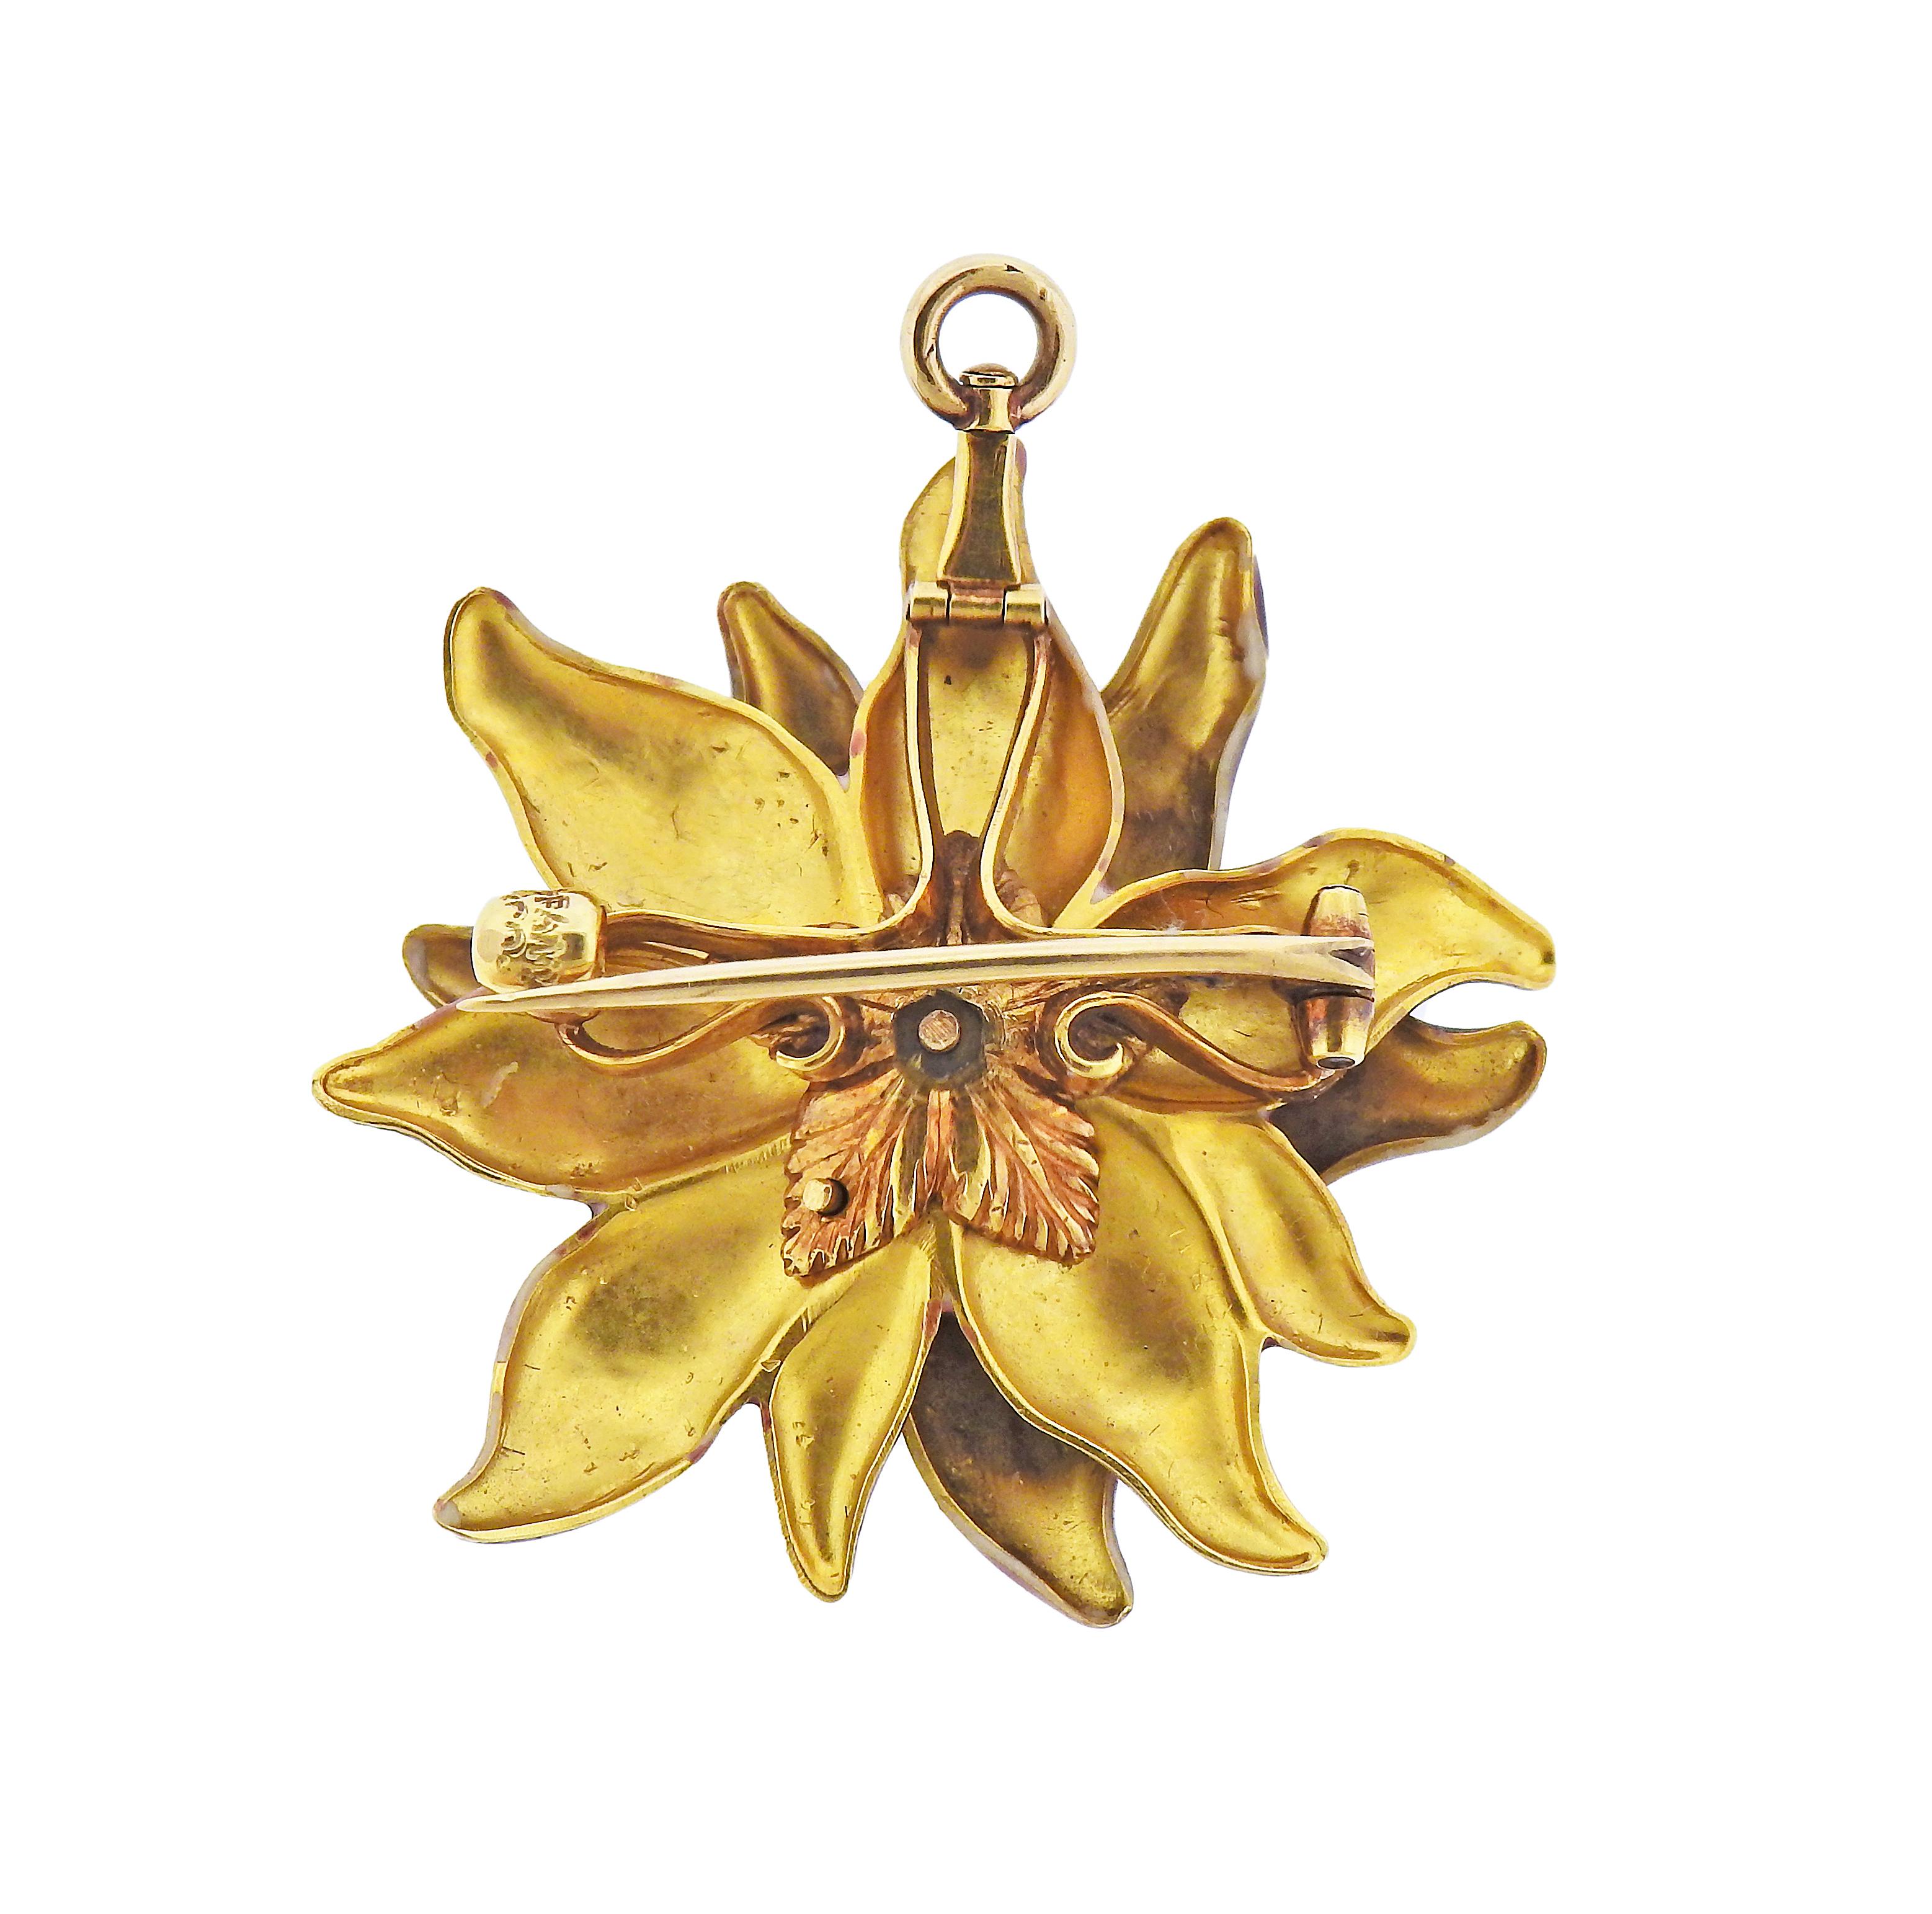 Antique Tiffany & Co 14k gold flower brooch, with 3.6mm pearl and enamel top. Brooch measures 32mm x 34mm. Marked Tiffany & Co. Weight - 9.6 grams.